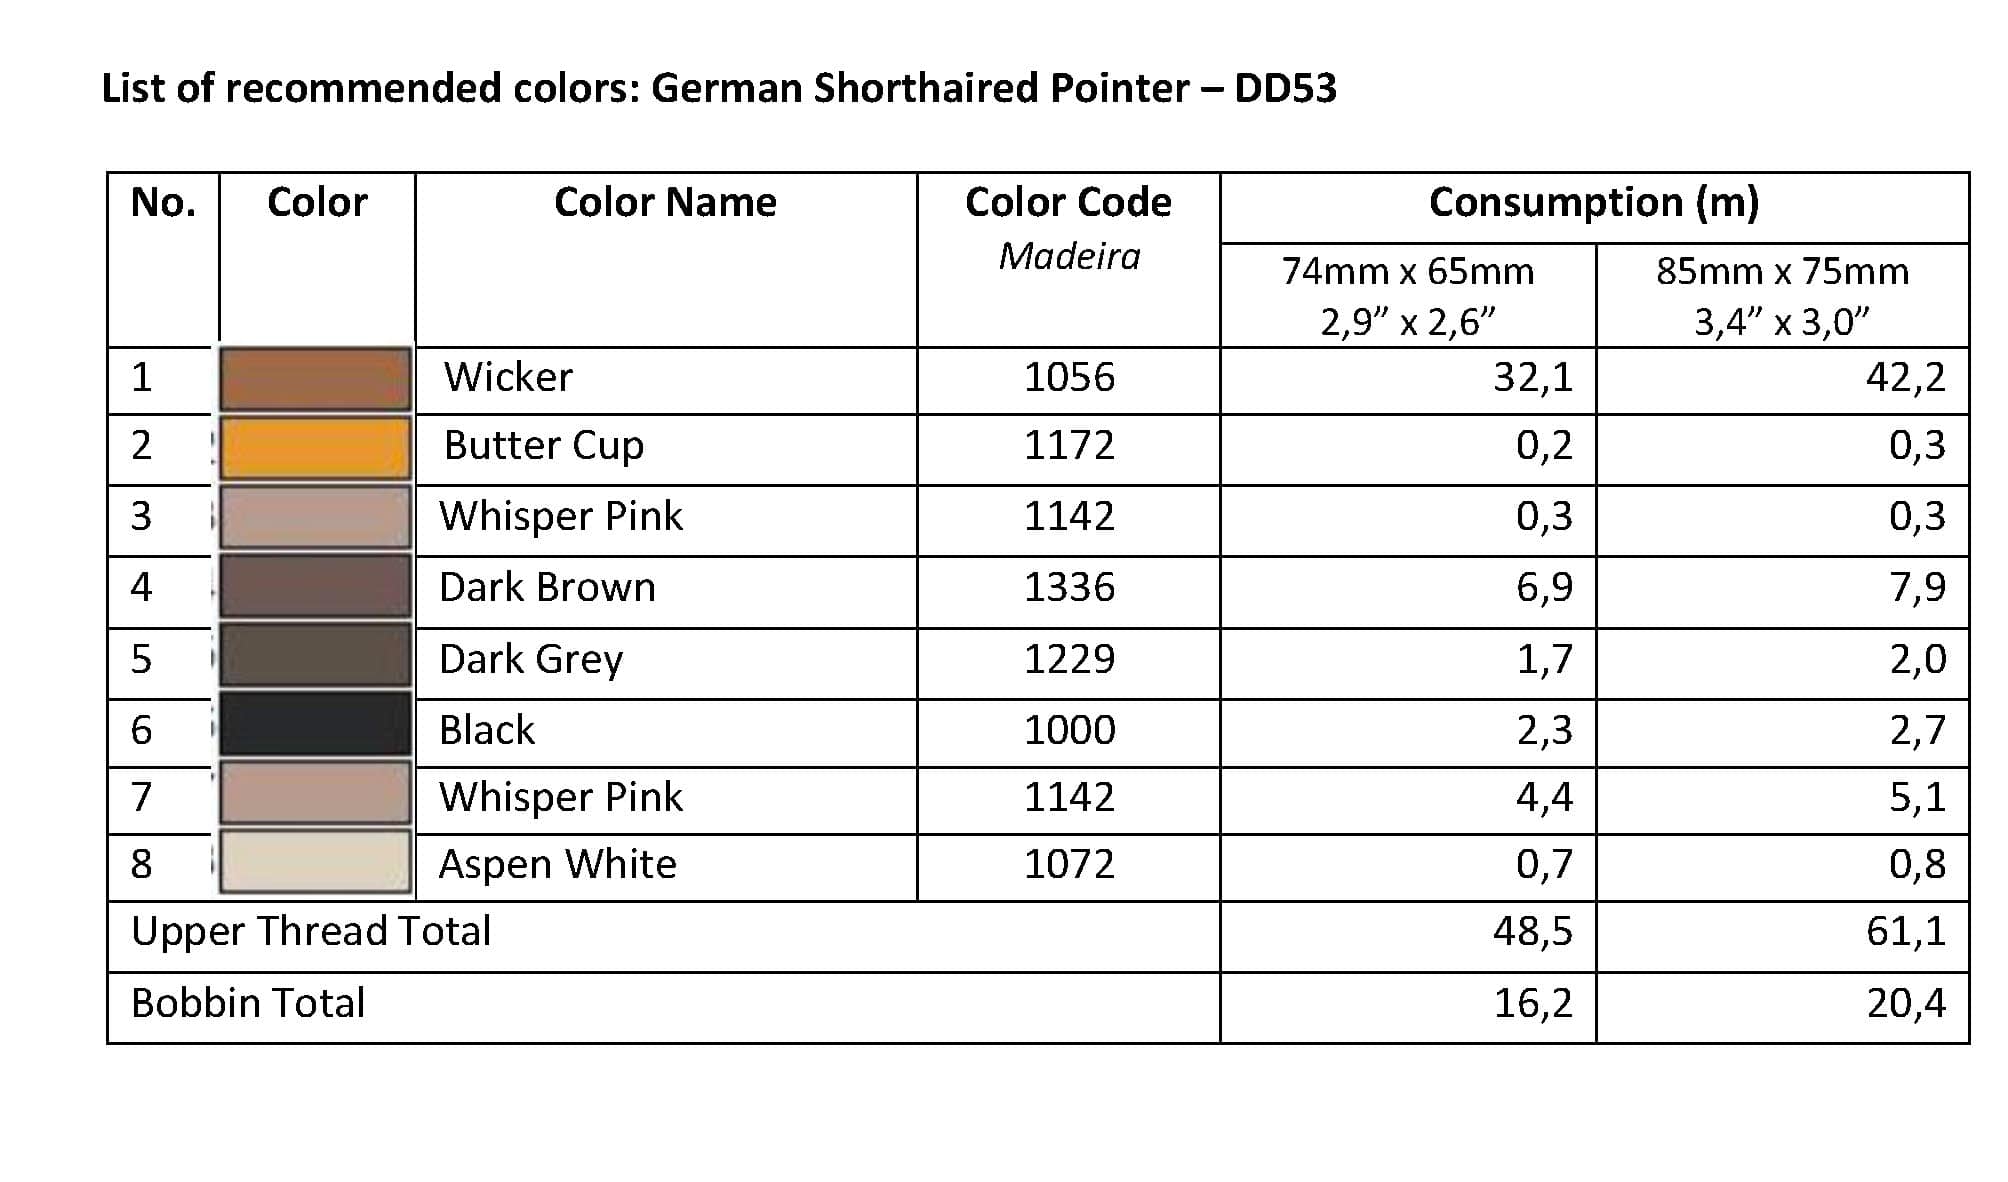 List of Recommended Colors - German Shorthaired Pointer DD53